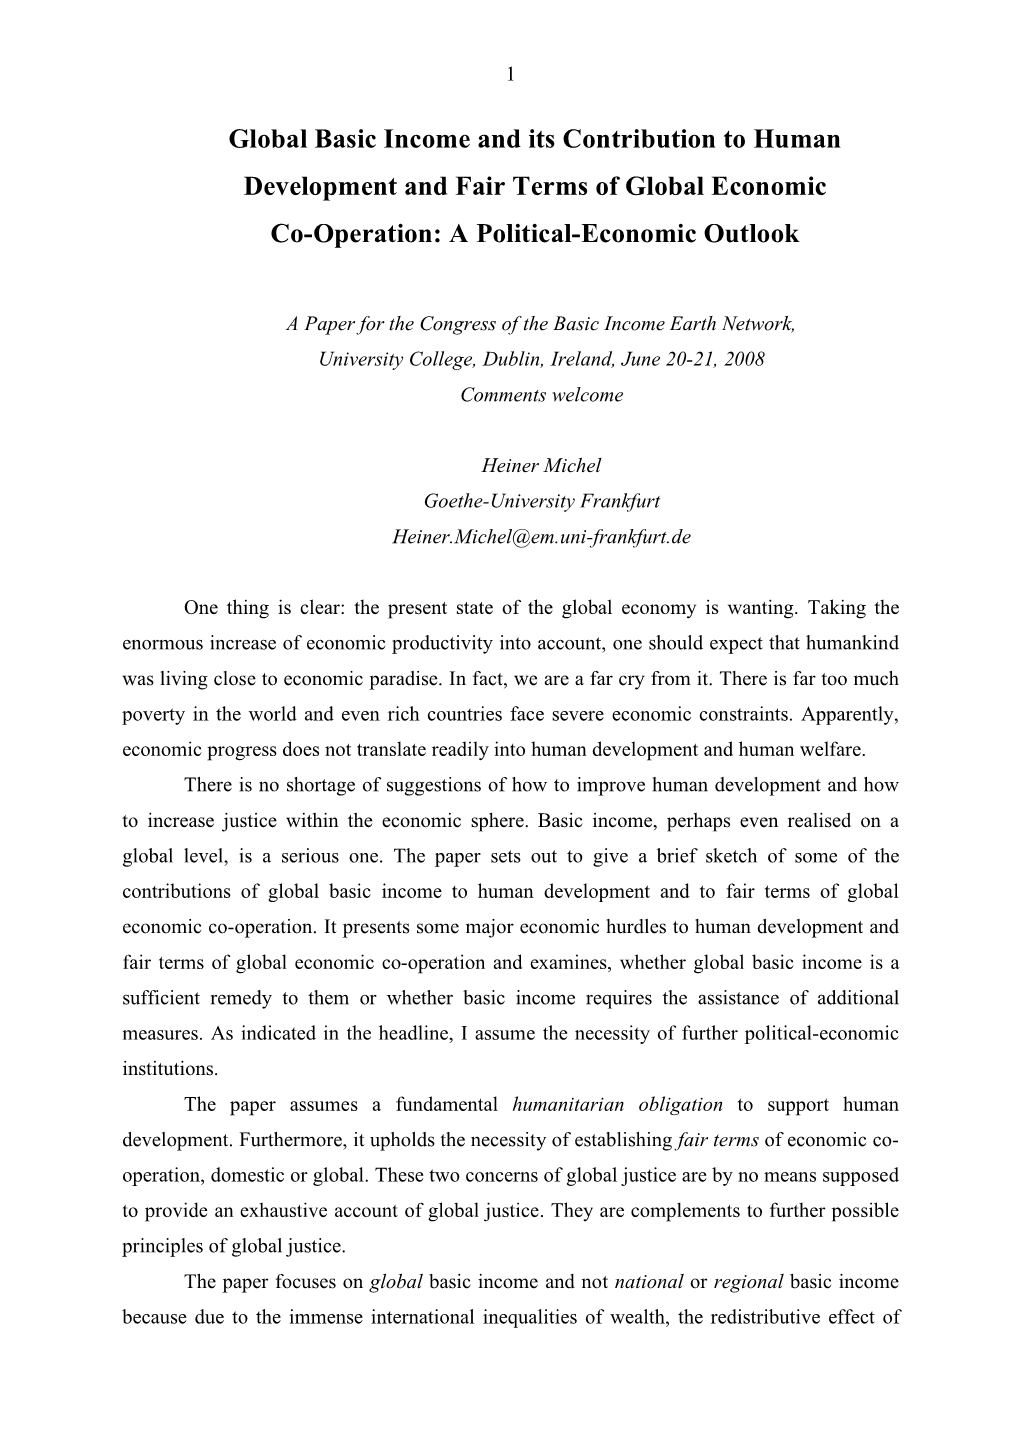 Global Basic Income and Its Contribution to Human Development and Fair Terms of Global Economic Co-Operation: a Political-Economic Outlook